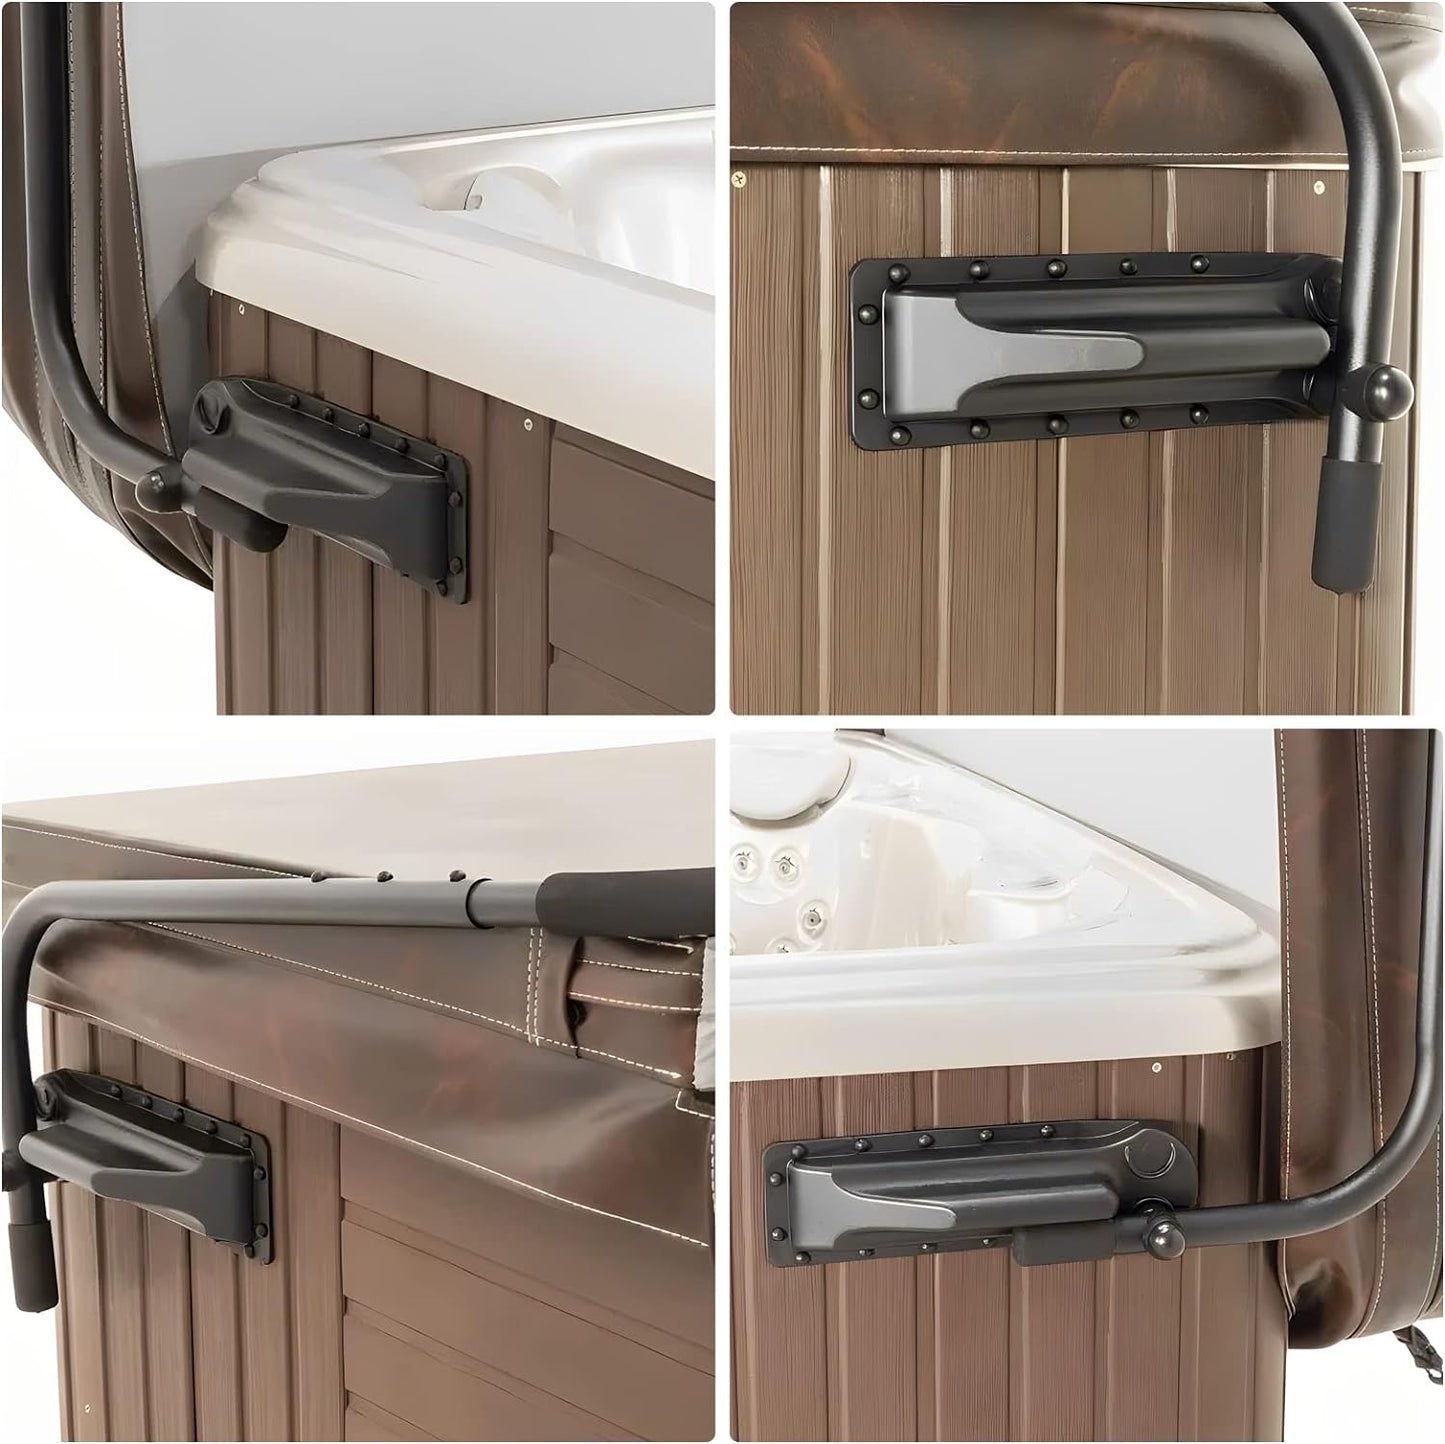 Spa Cover Lifts - Pivot Top Mount Spa & Hot Tub Cover Lift Removal System